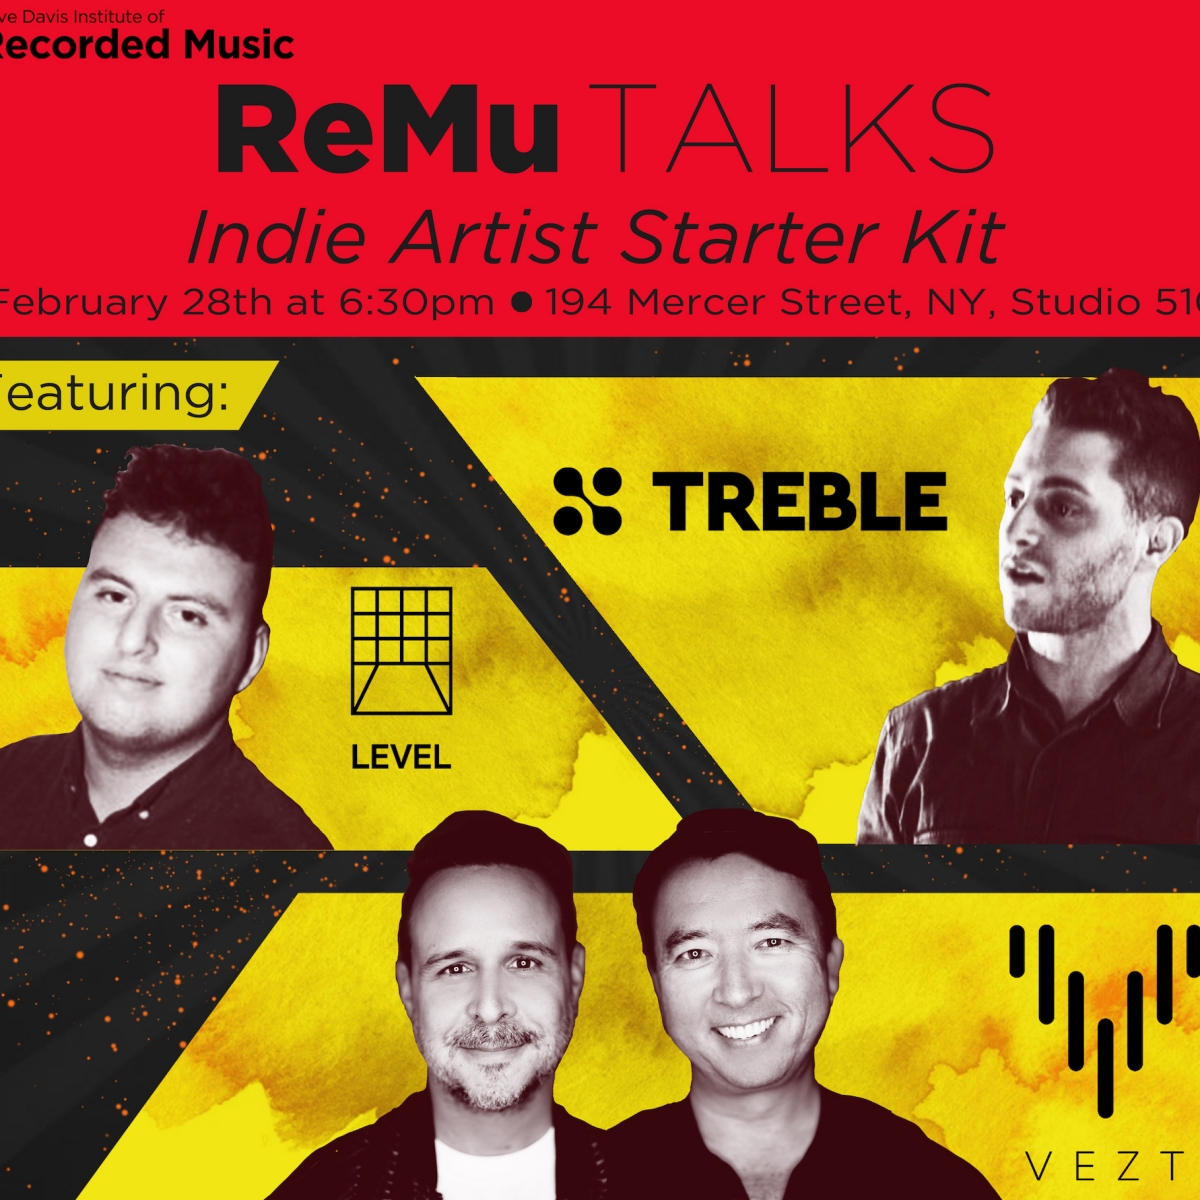 flyer for ReMu Talks: Indie Artist Starter Kit featuring the companies Vezt, Teble, and Level